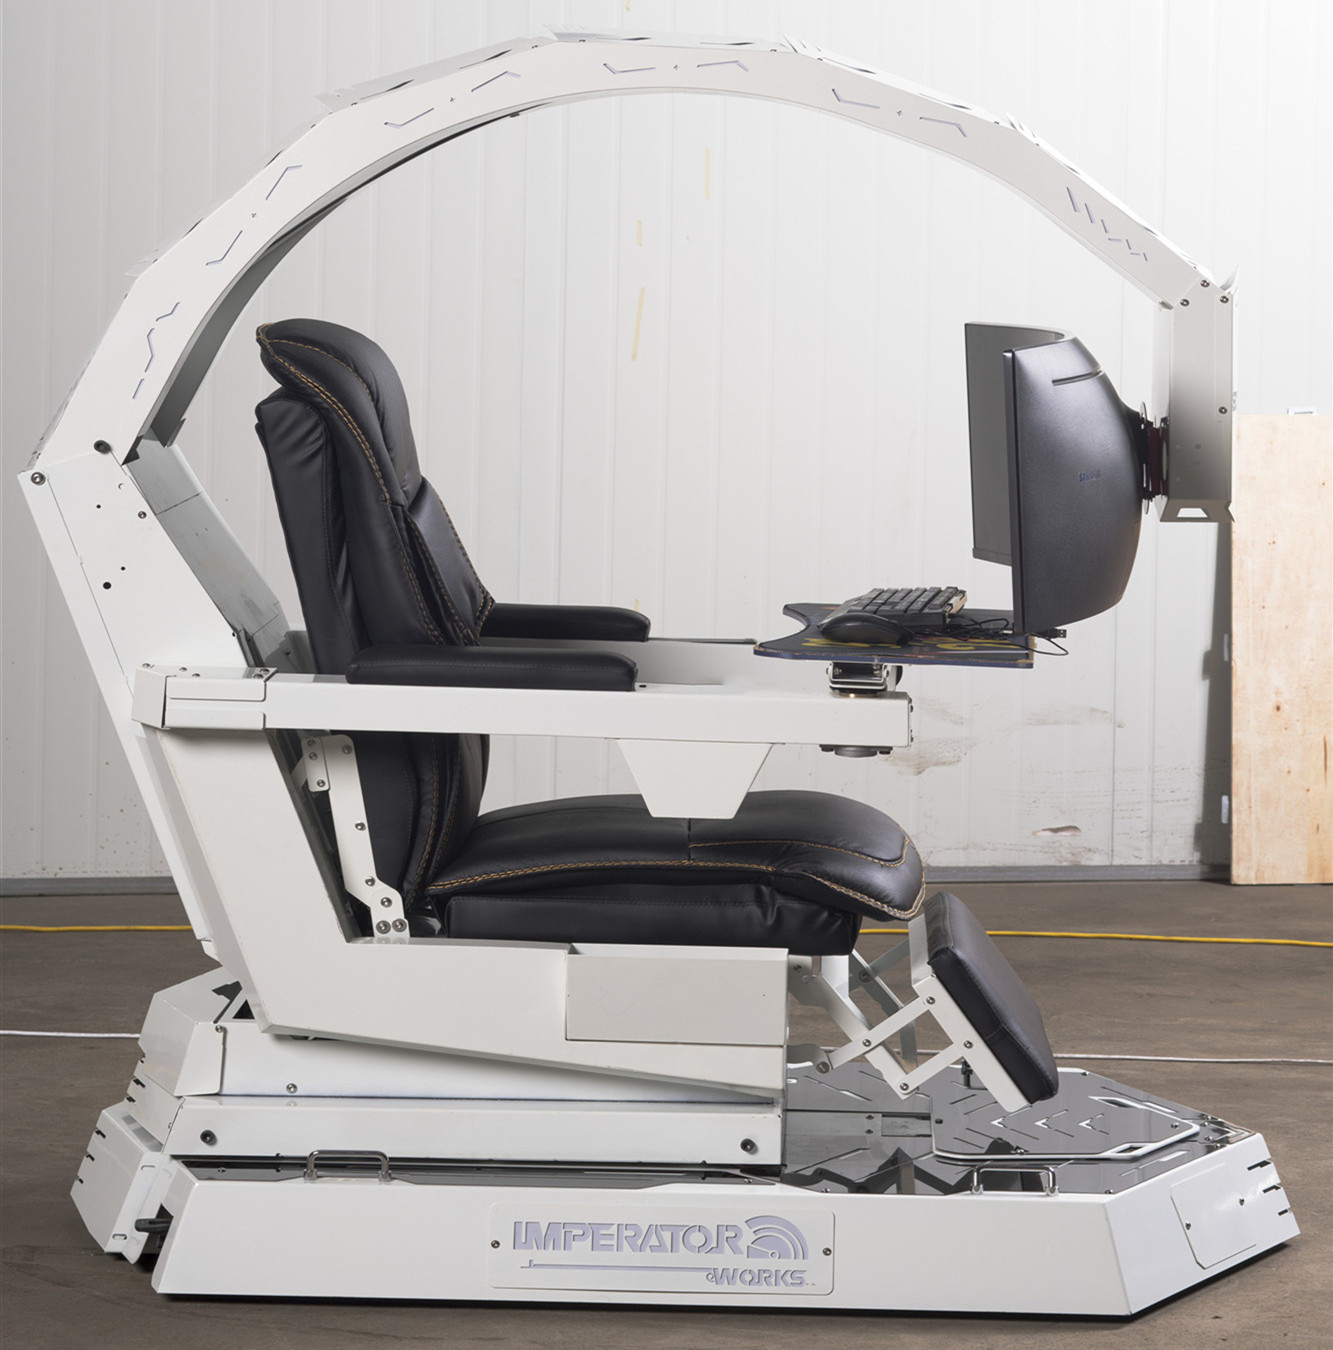 R1 Computer Workstation Gaming Cockpit  most classical design for 3*32" monitors since 2017 genuine leather massage chair